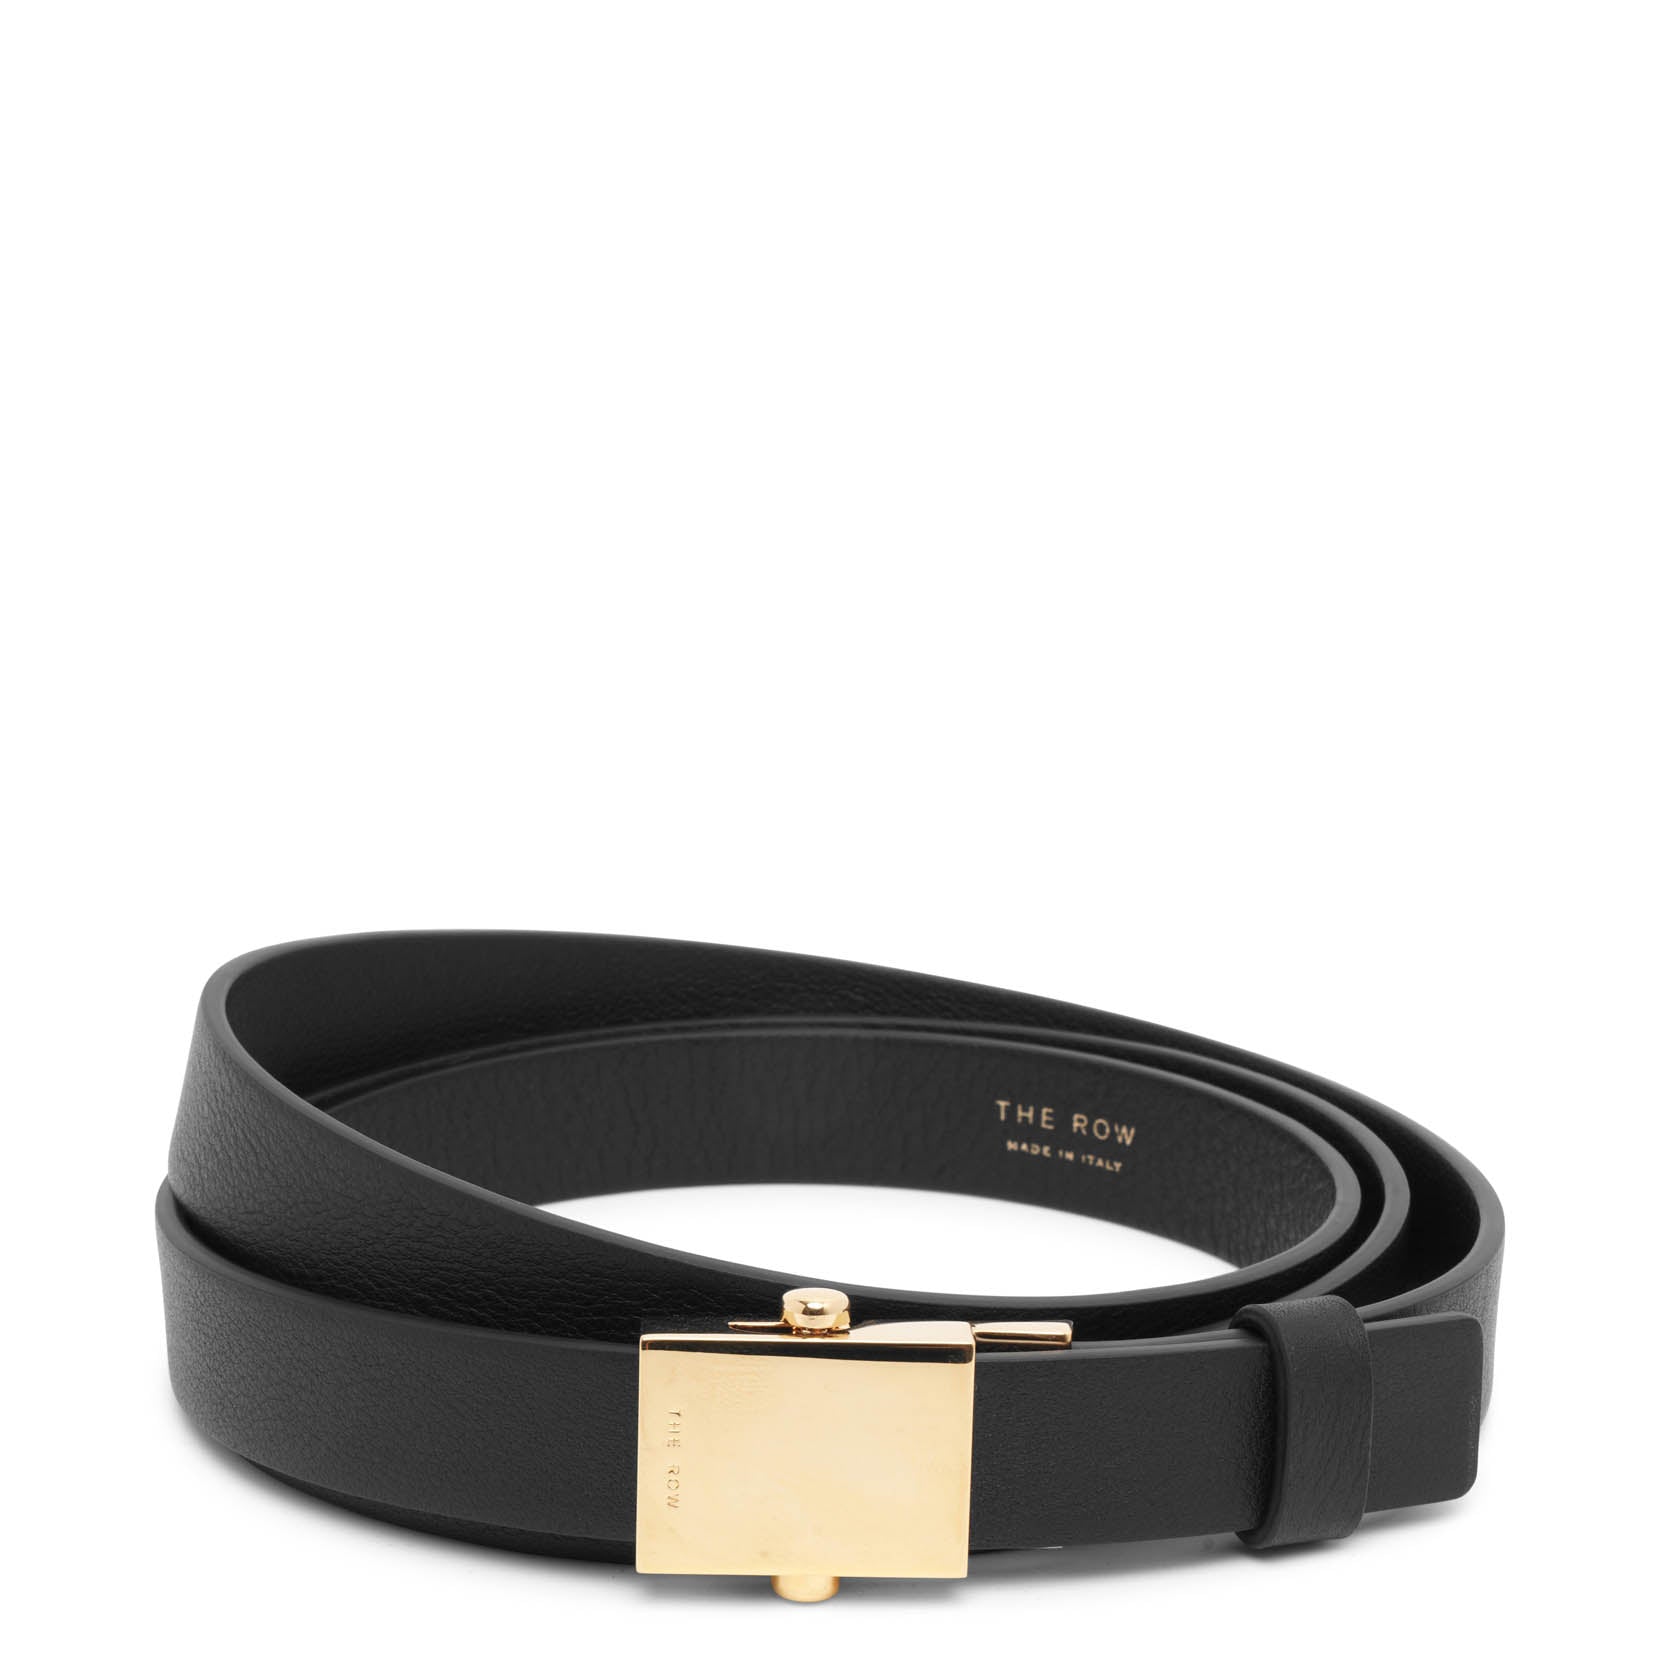 THE ROW BRIAN BELT BLACK AND GOLD LEATHER BELT